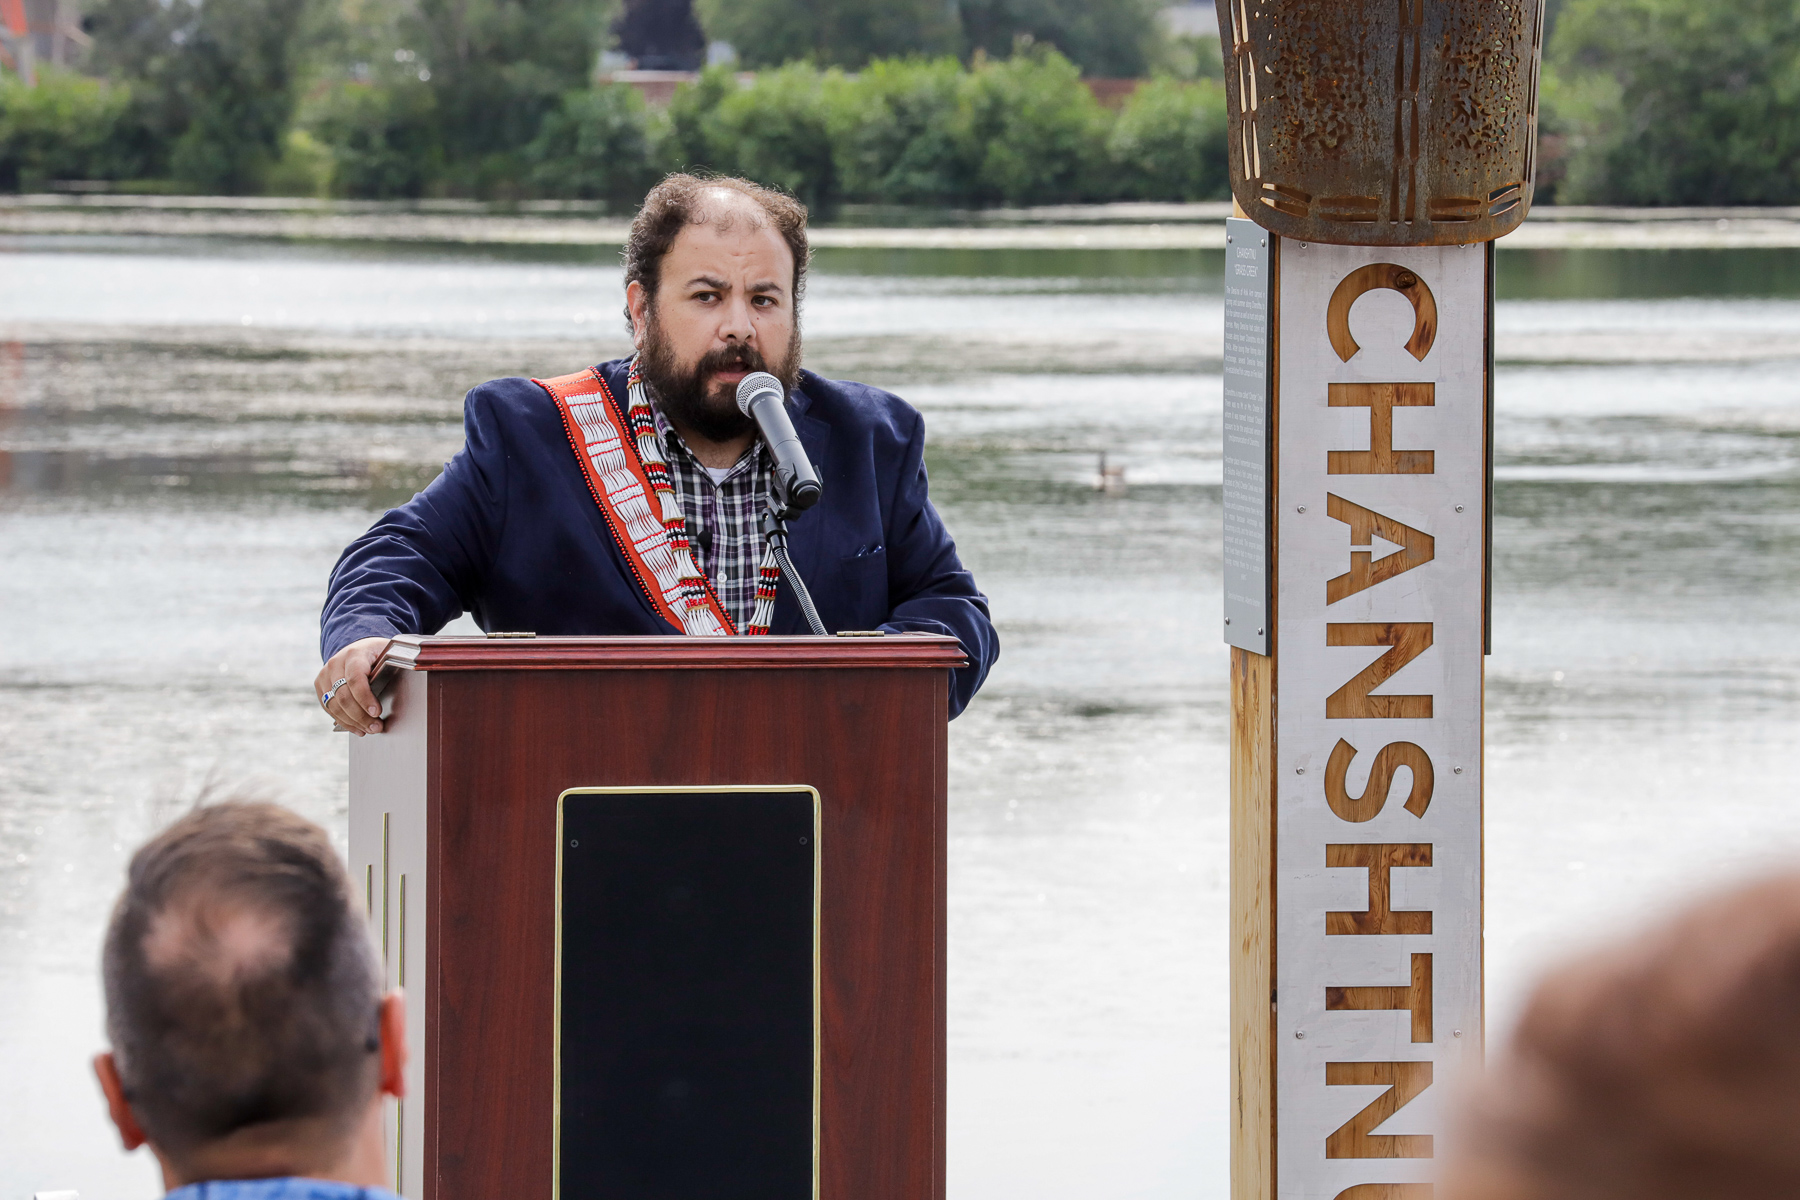 a person speaks from behind a podium, next to an art installation, in front of a lagoon